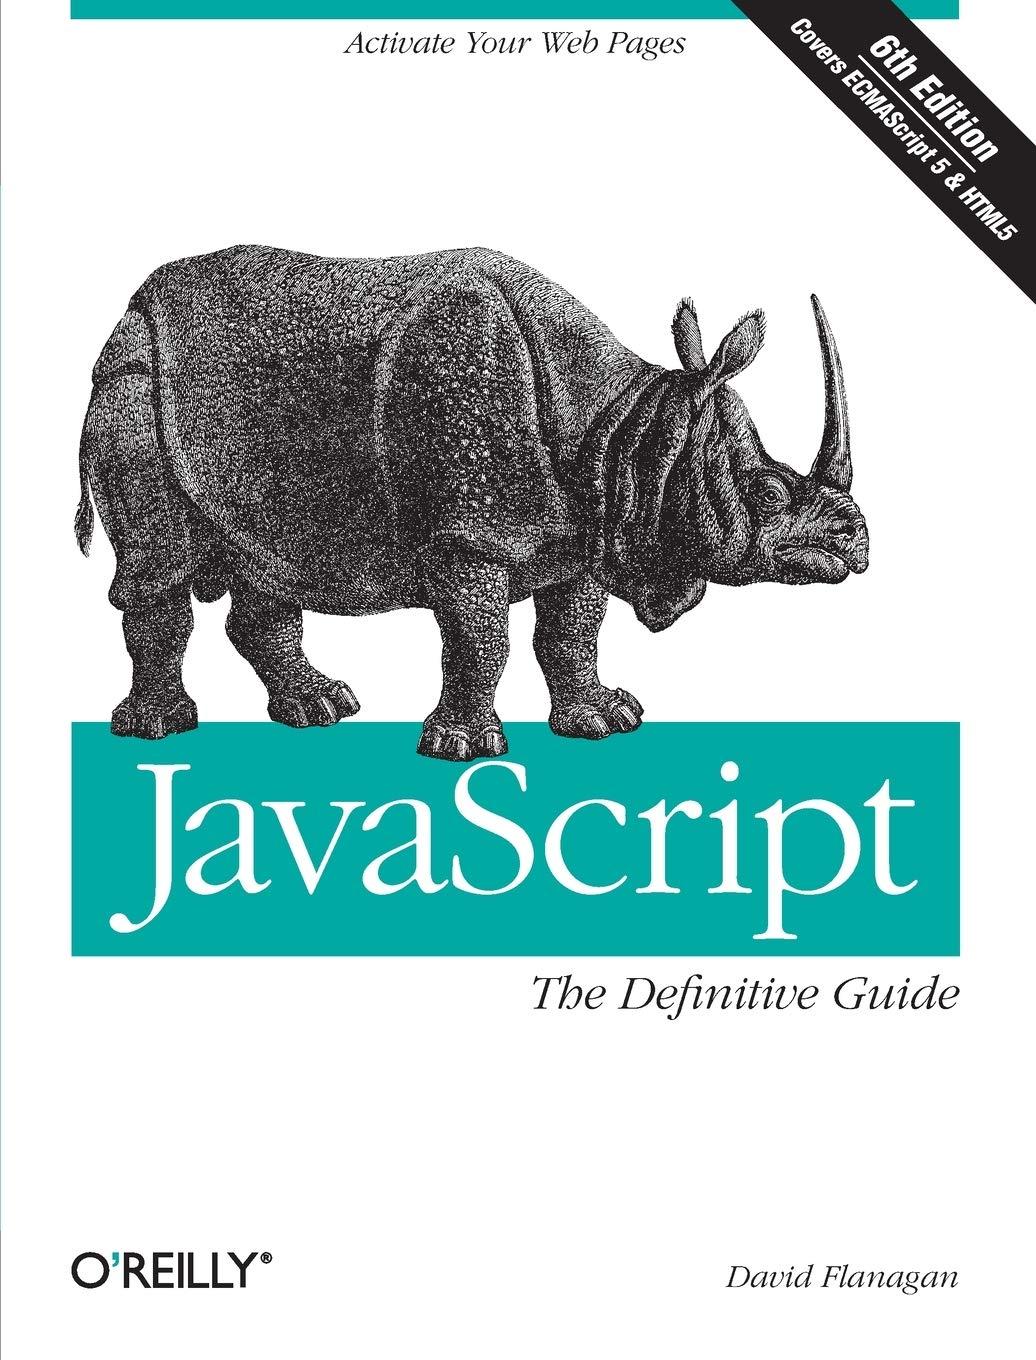 javascript the definitive guide activate your web pages 6th edition david flanagan 0596805527, 978-0596805524